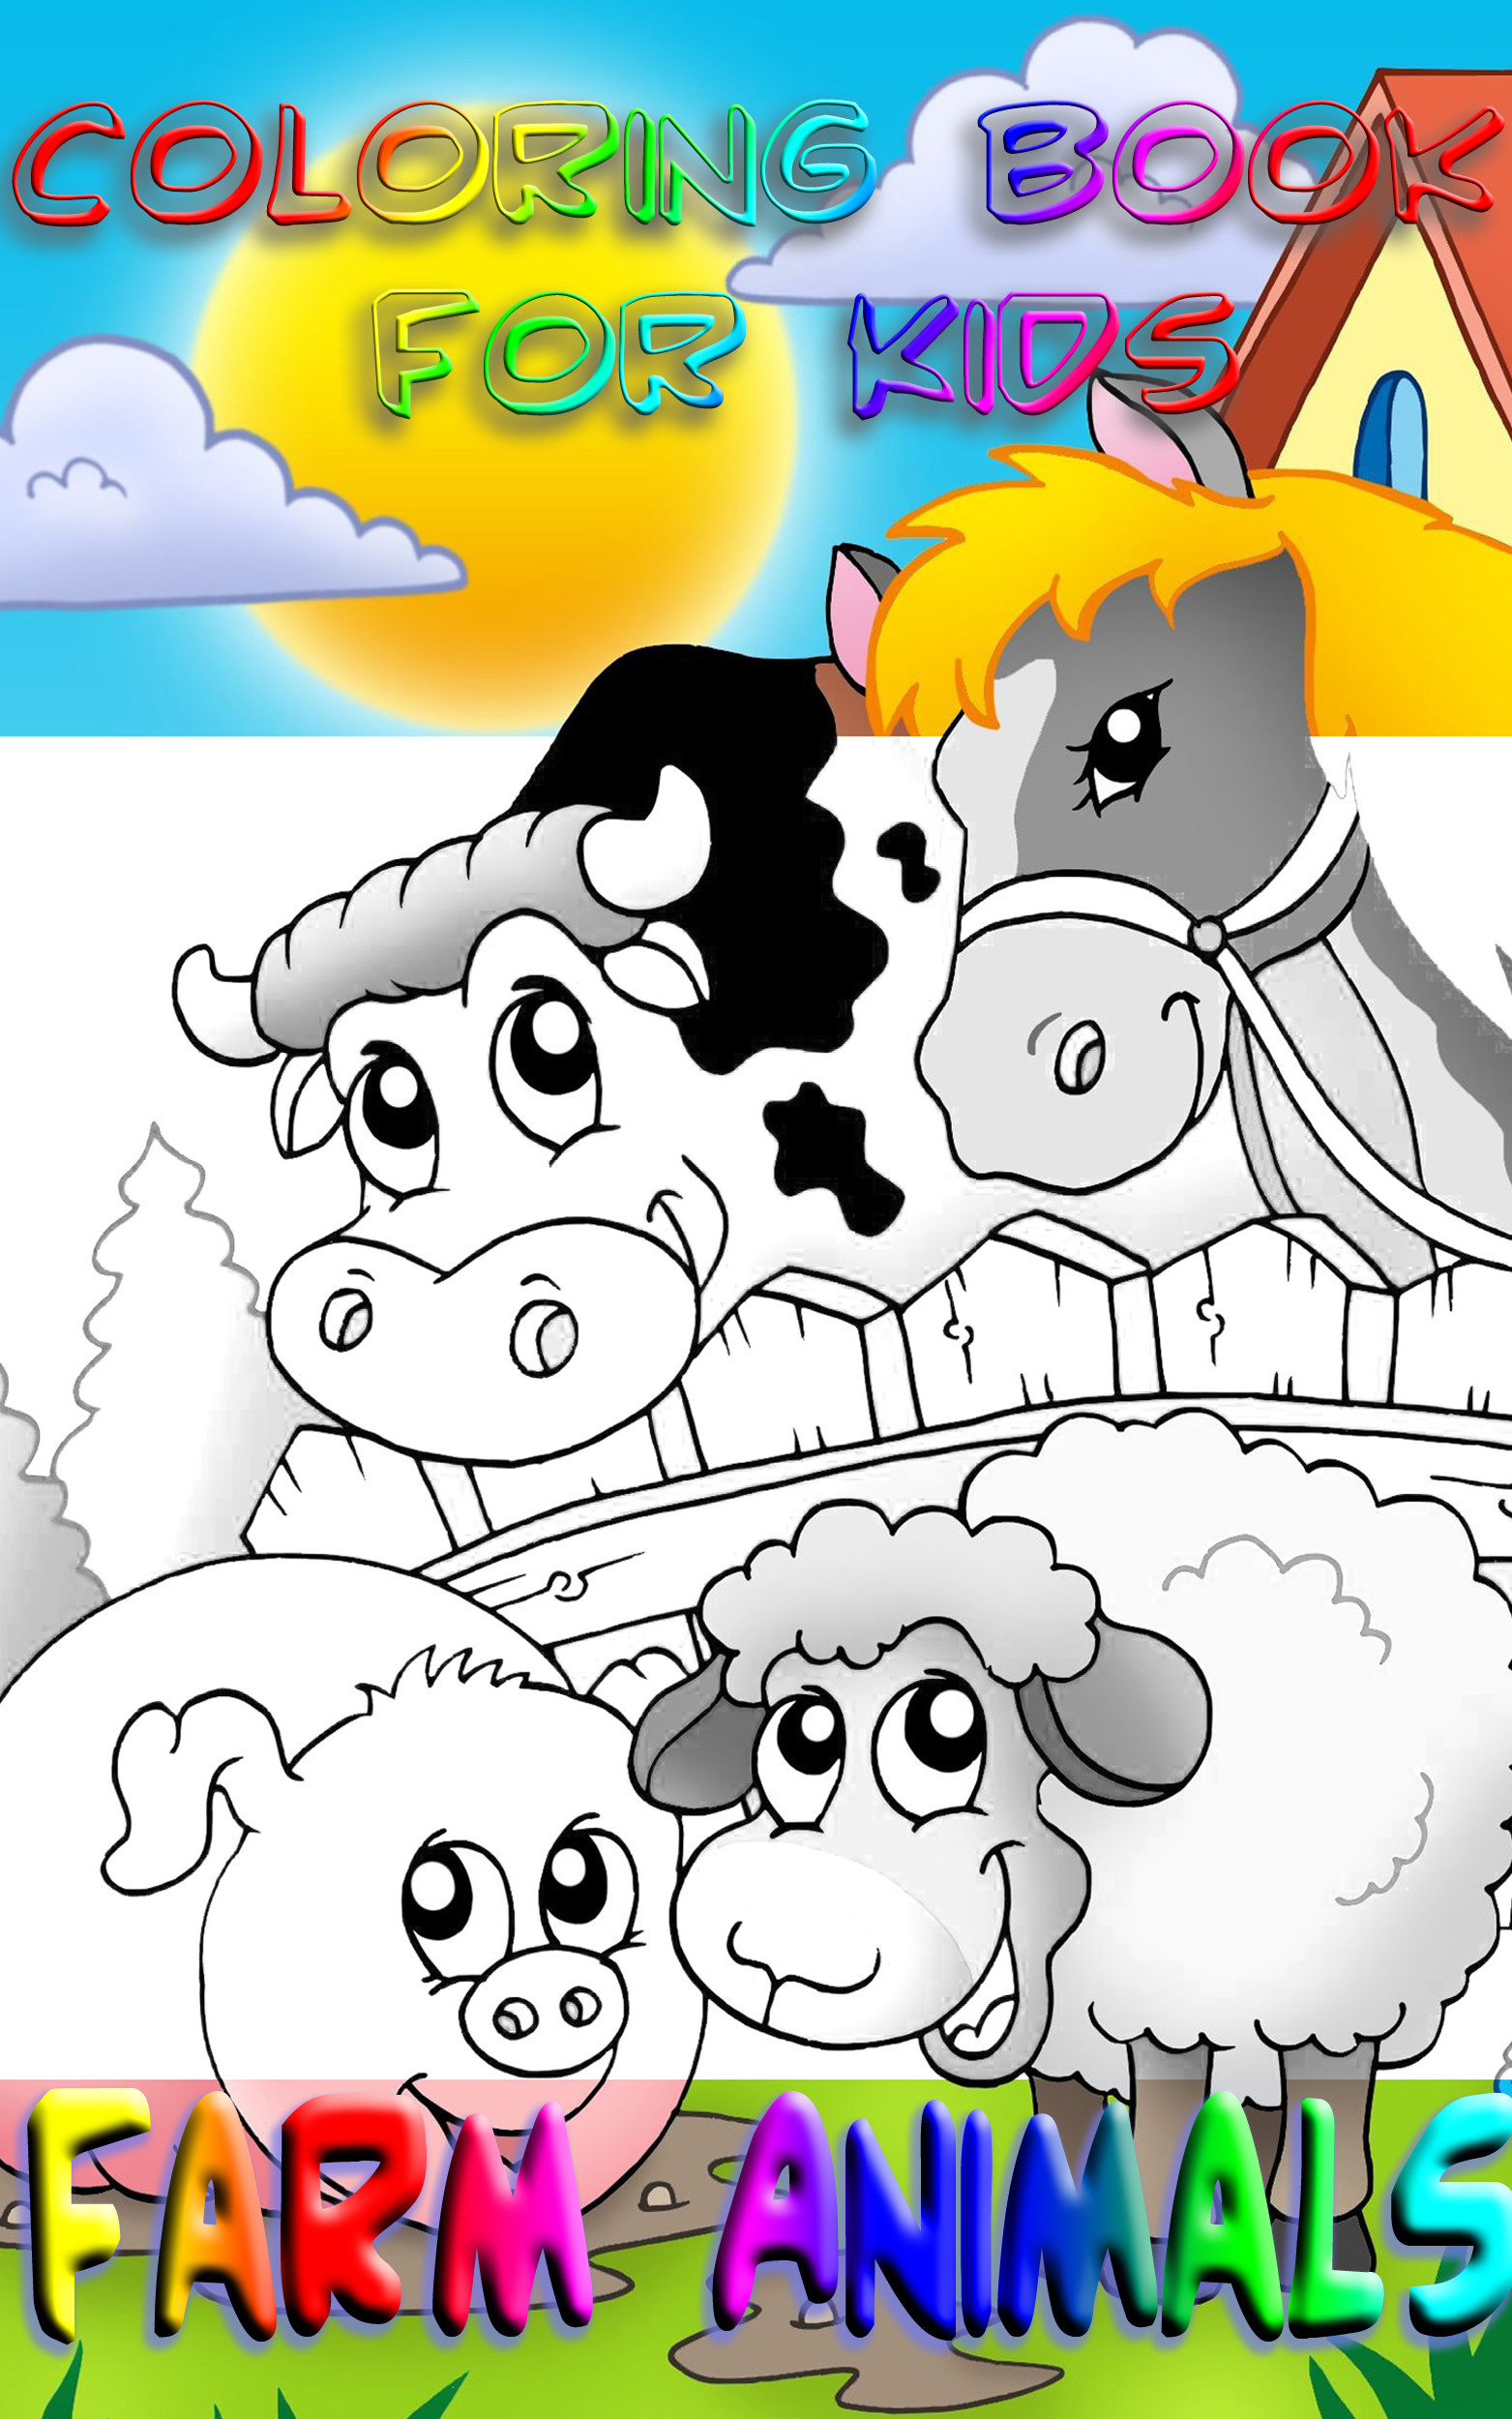 Coloring Books For Kids Animal
 Farm Animals Coloring Book for Kids